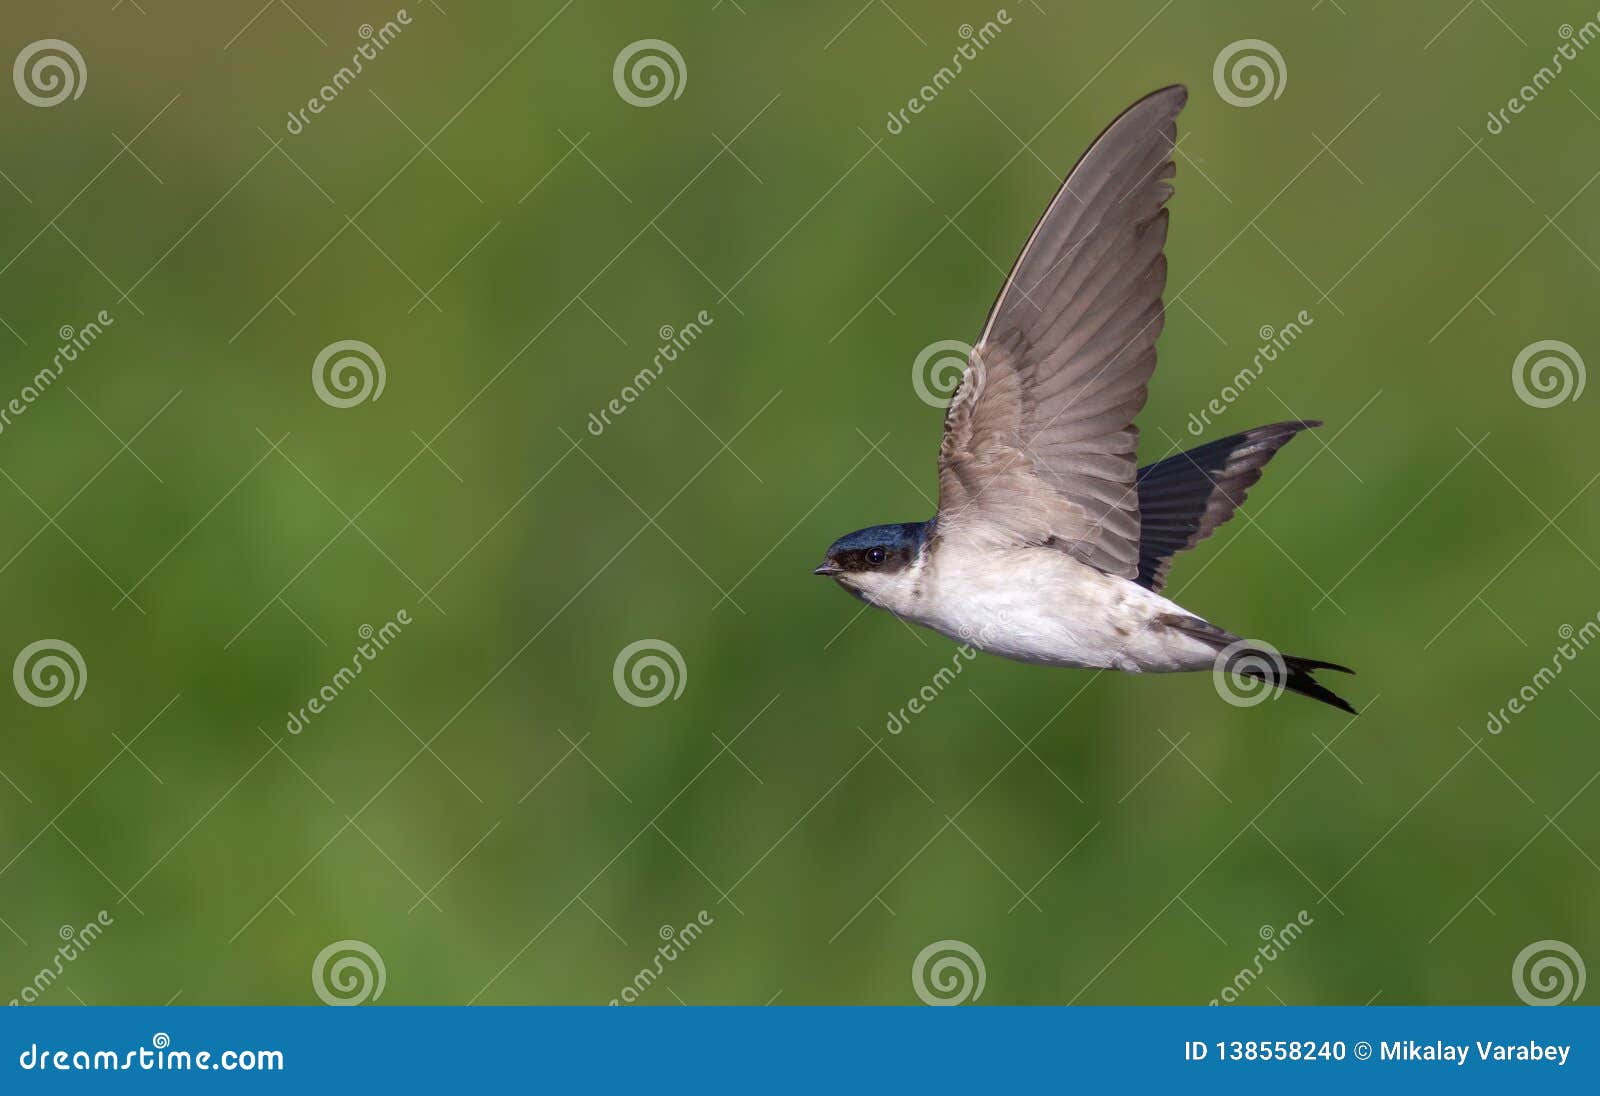 common house martin swift flying on green background